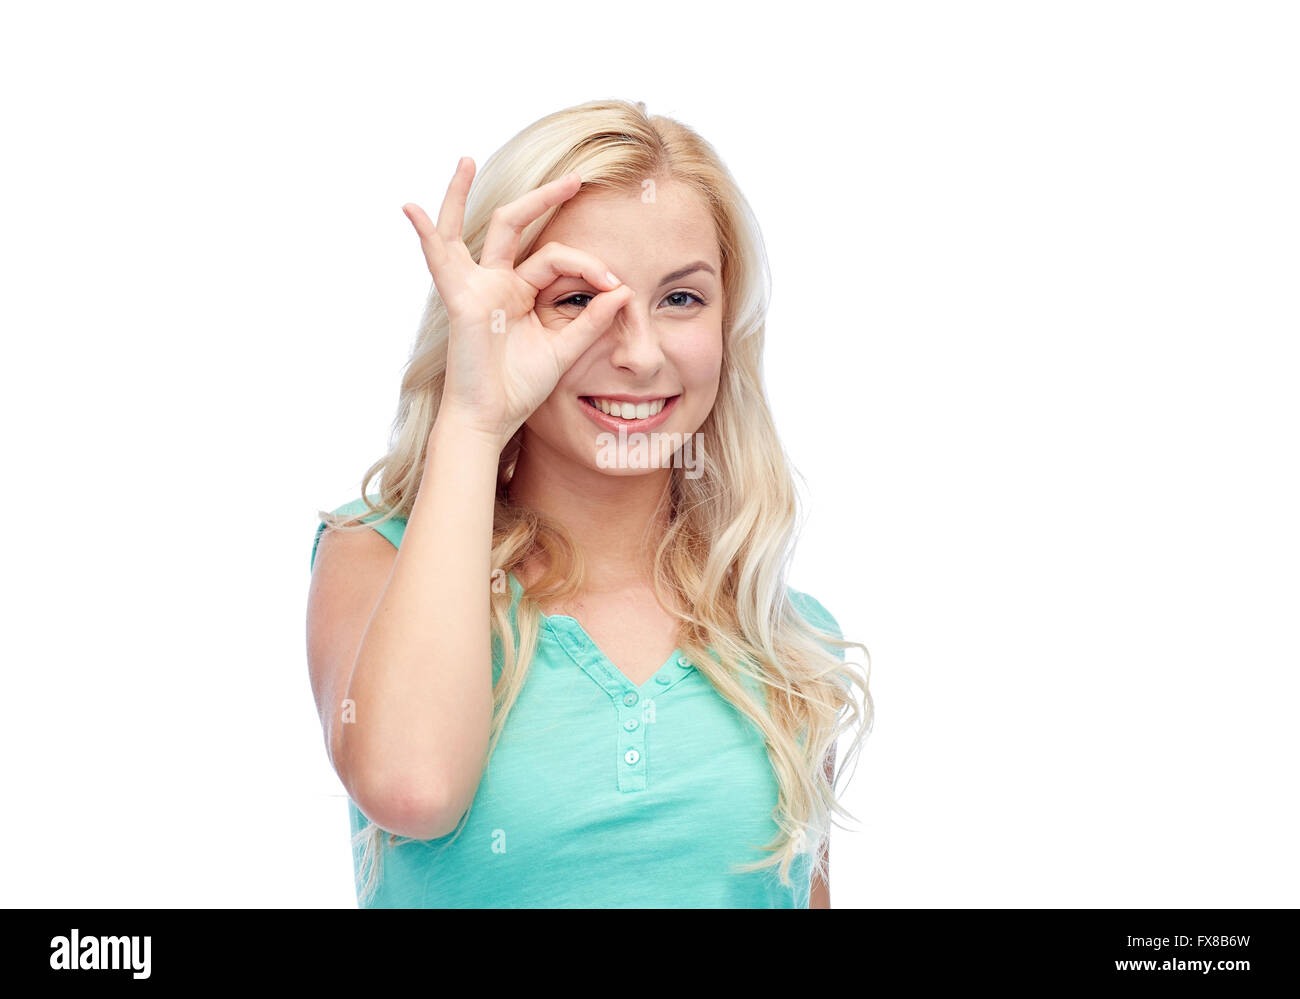 young woman making ok hand gesture Stock Photo